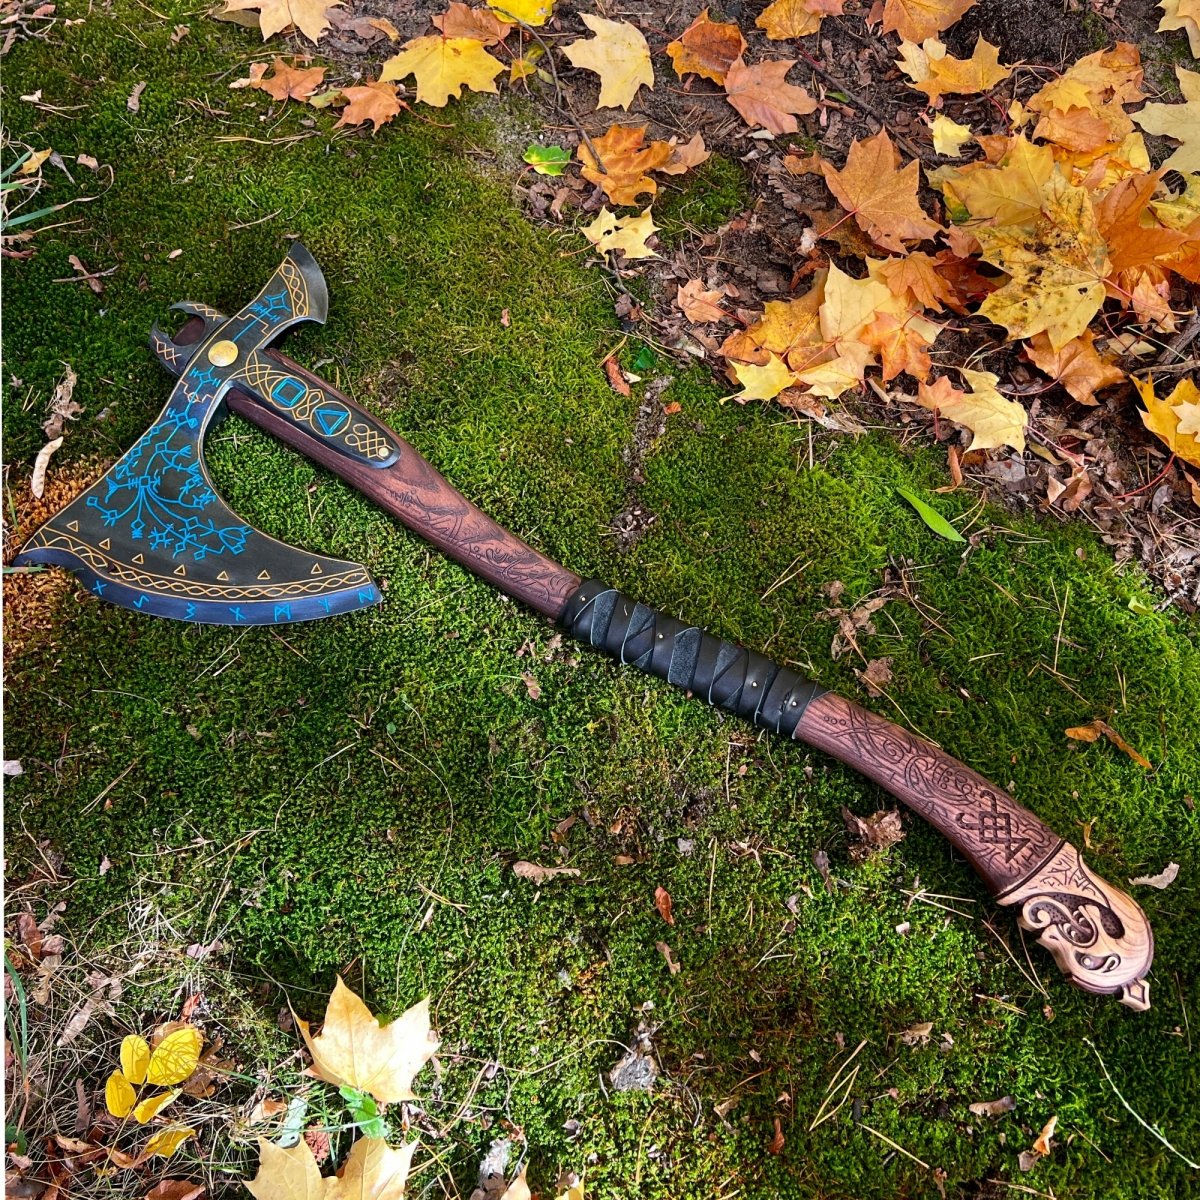 Hand-forged Leviathan axe with carved handle 35.8" - Kratos axe with leather wrap 8 lbs from AncientSmithy